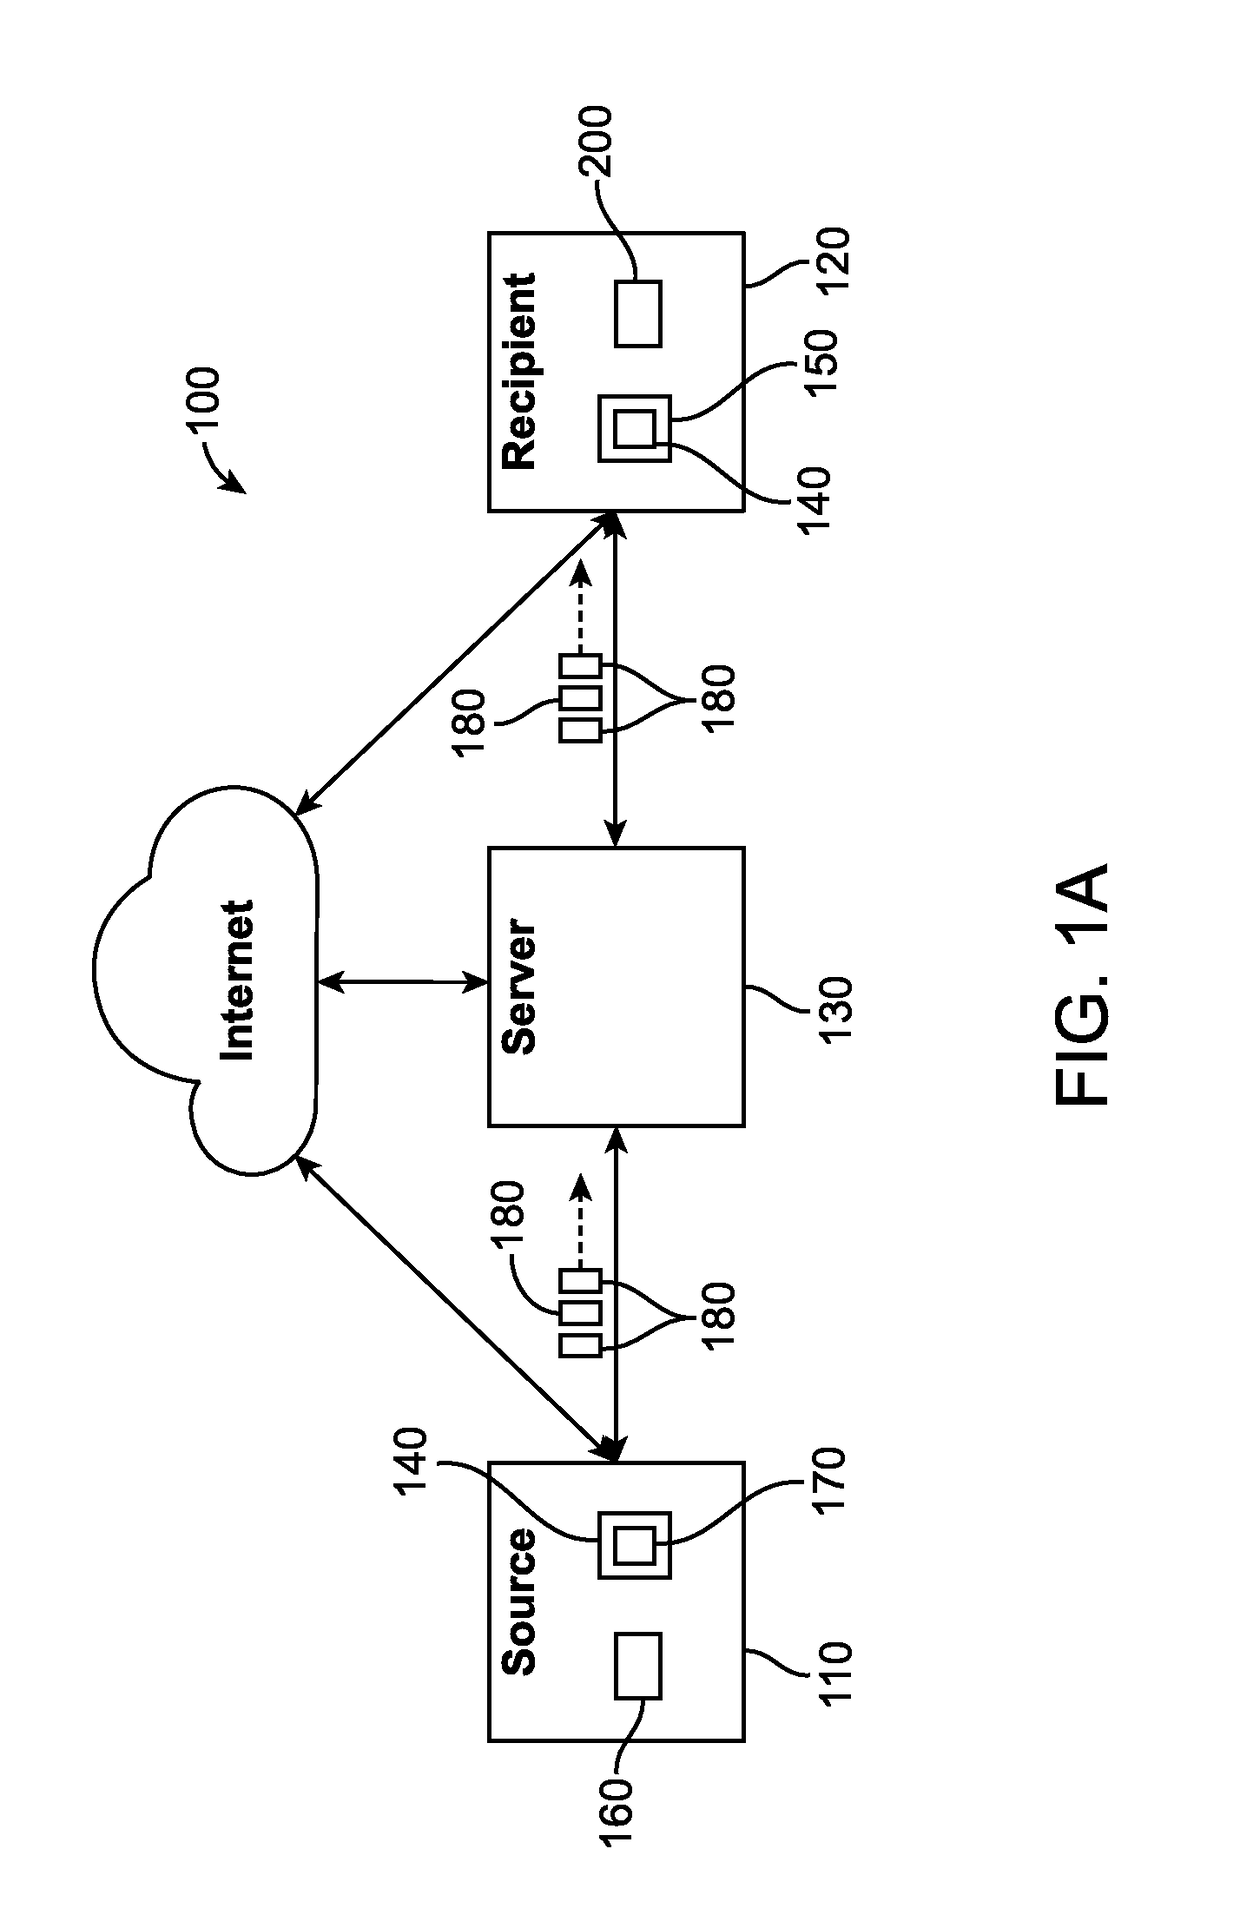 Systems and methods for security hardening of data in transit and at rest via segmentation, shuffling and multi-key encryption